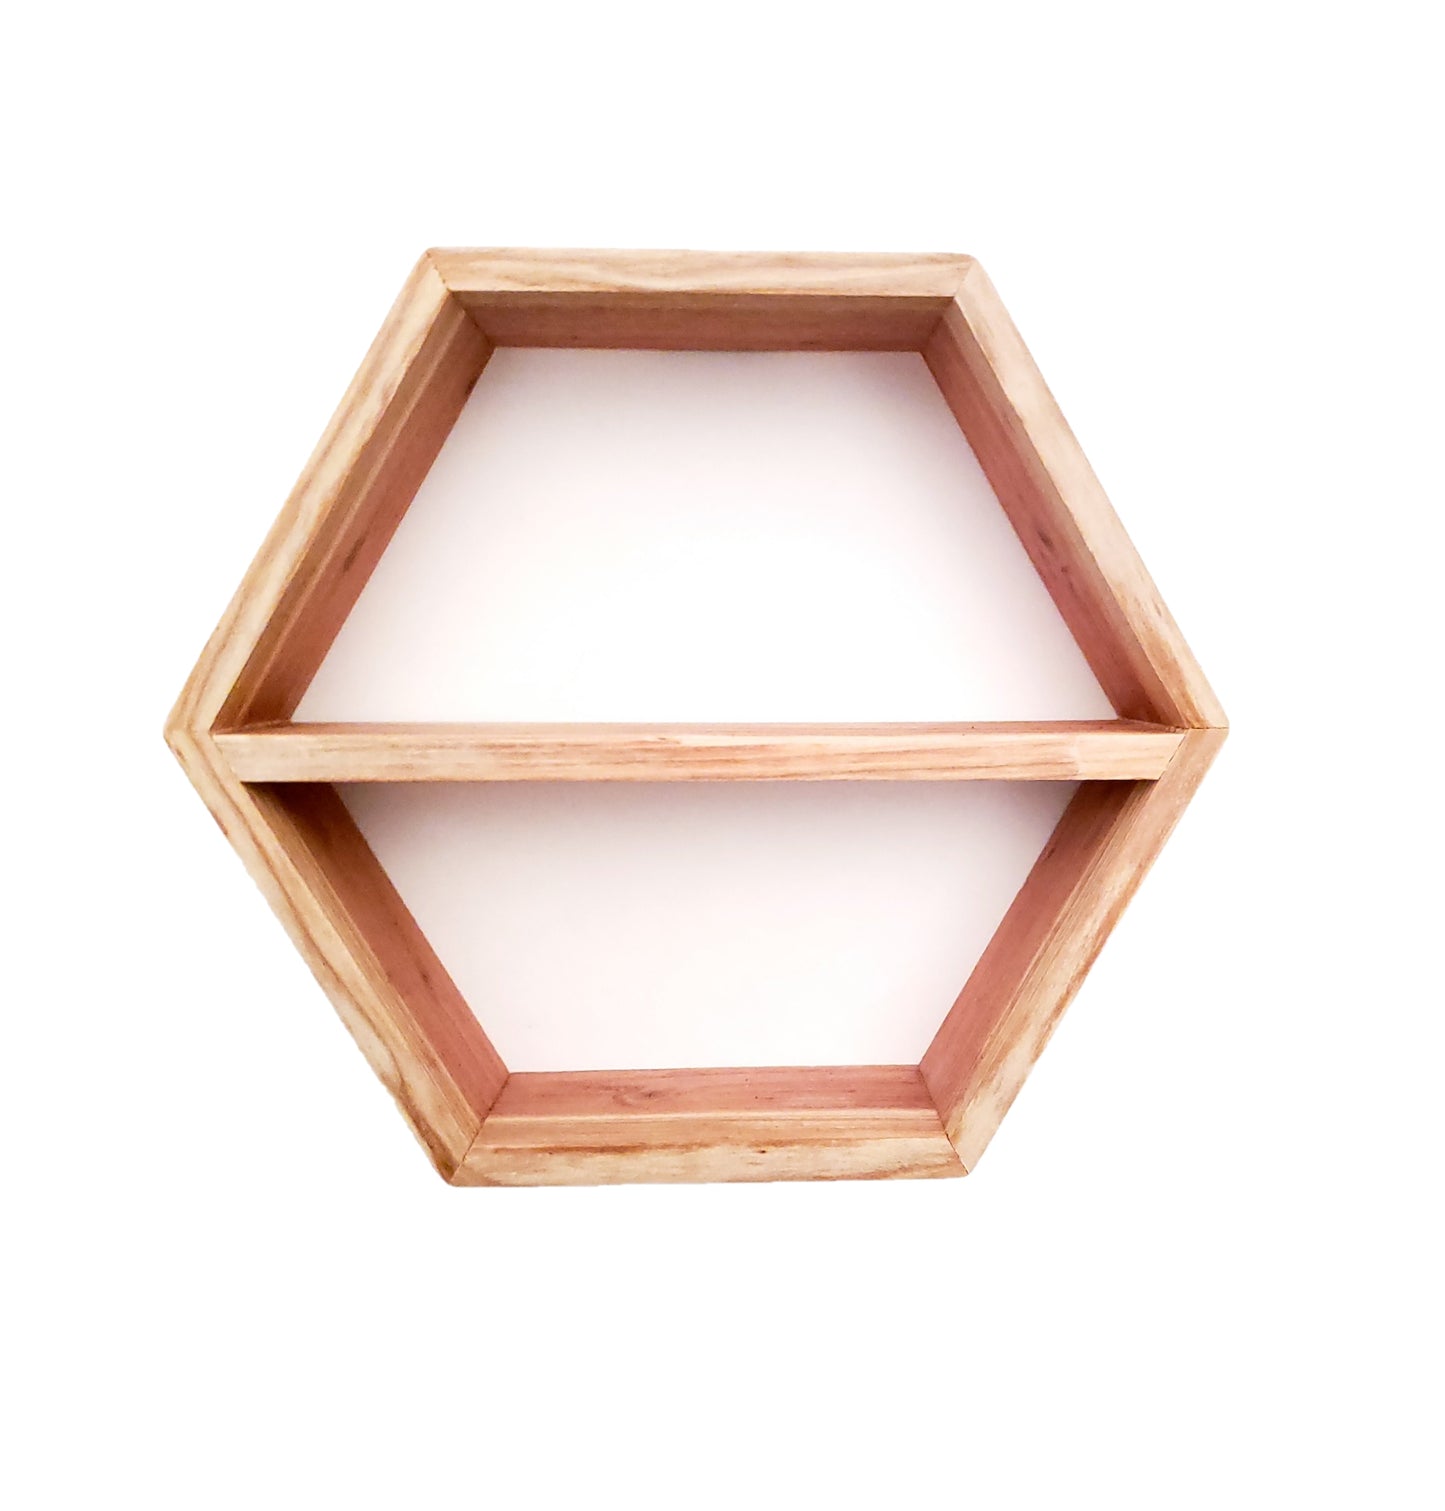  Full Measure Products Wooden Hexagon Shelves for Wall